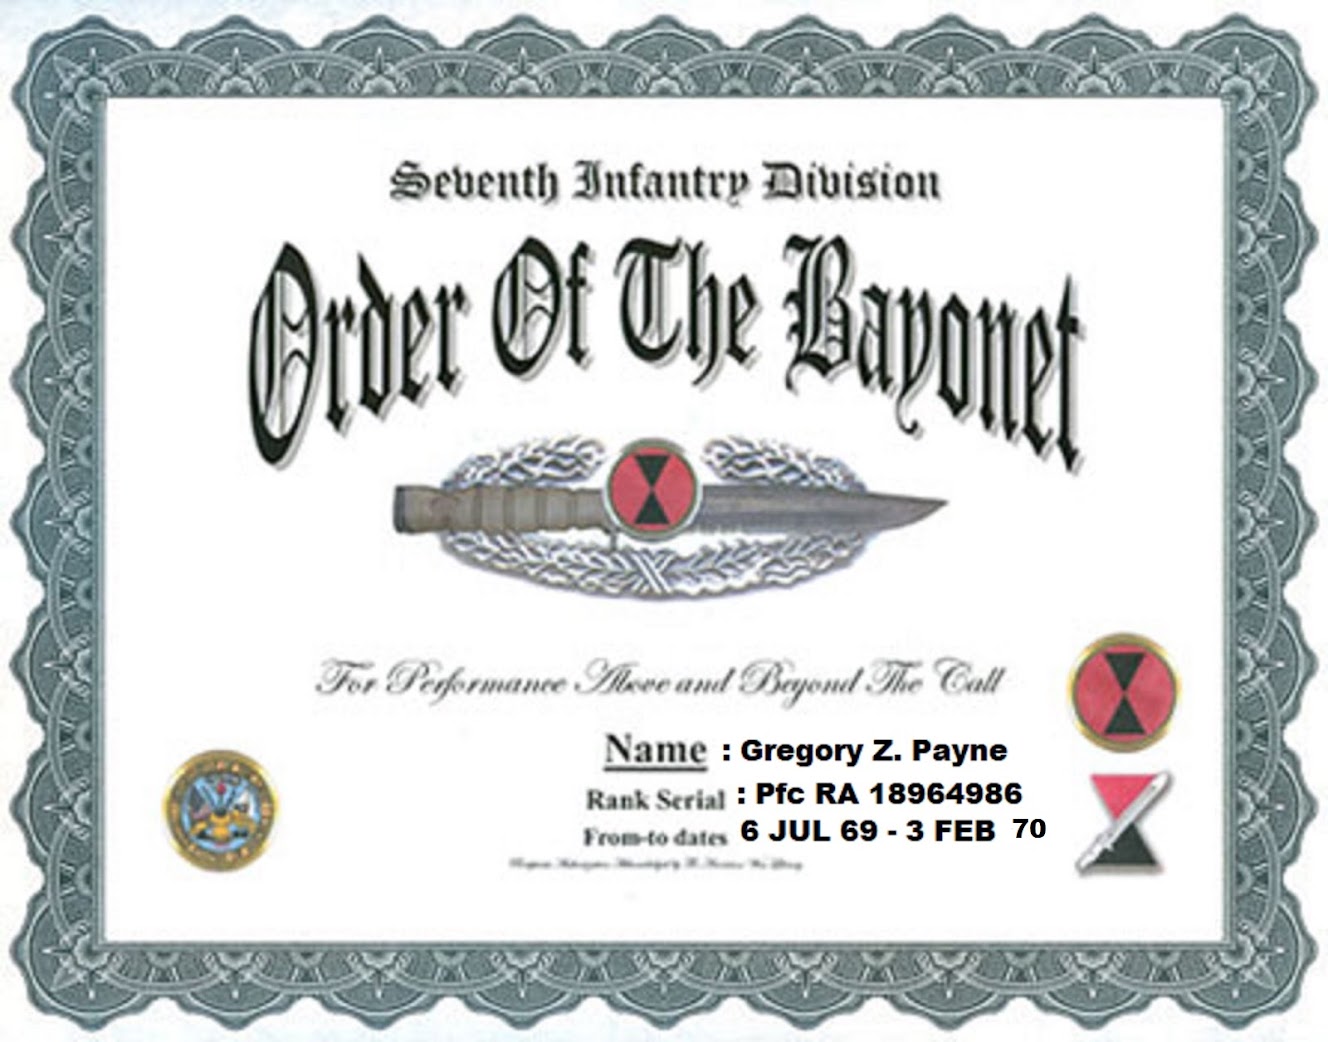 MY 7th INFANTRY DIVISION (LIGHT) BAYONET BADGE CERTIFICATE